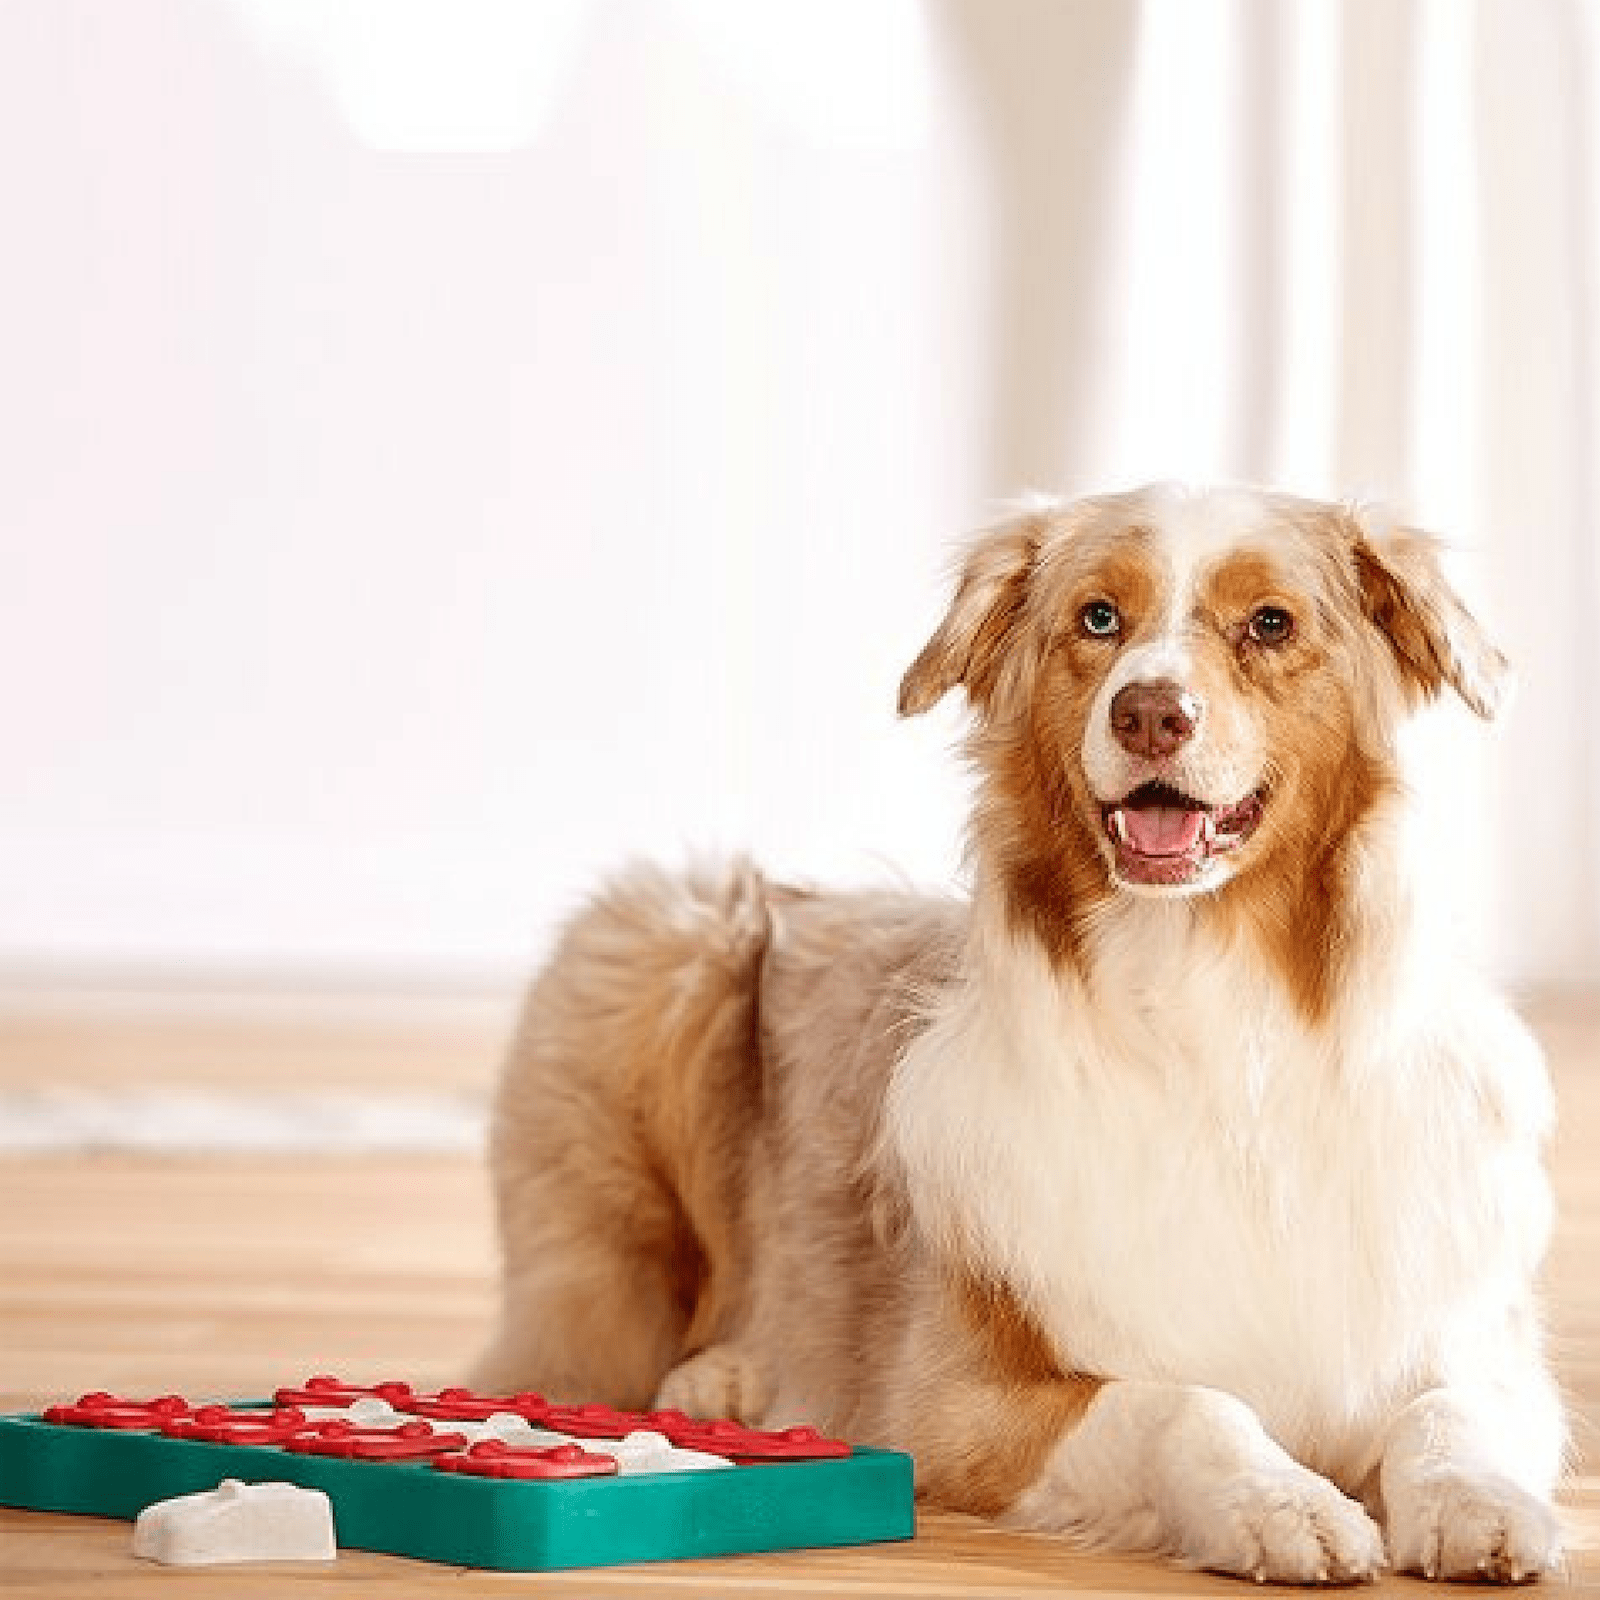 https://cdn.shopify.com/s/files/1/1733/0973/products/outward-hound-dog-toy-nina-ottosson-dog-puzzle-toy-interactive-treat-dispenser-dog-brick-3952792305767.png?v=1635181740